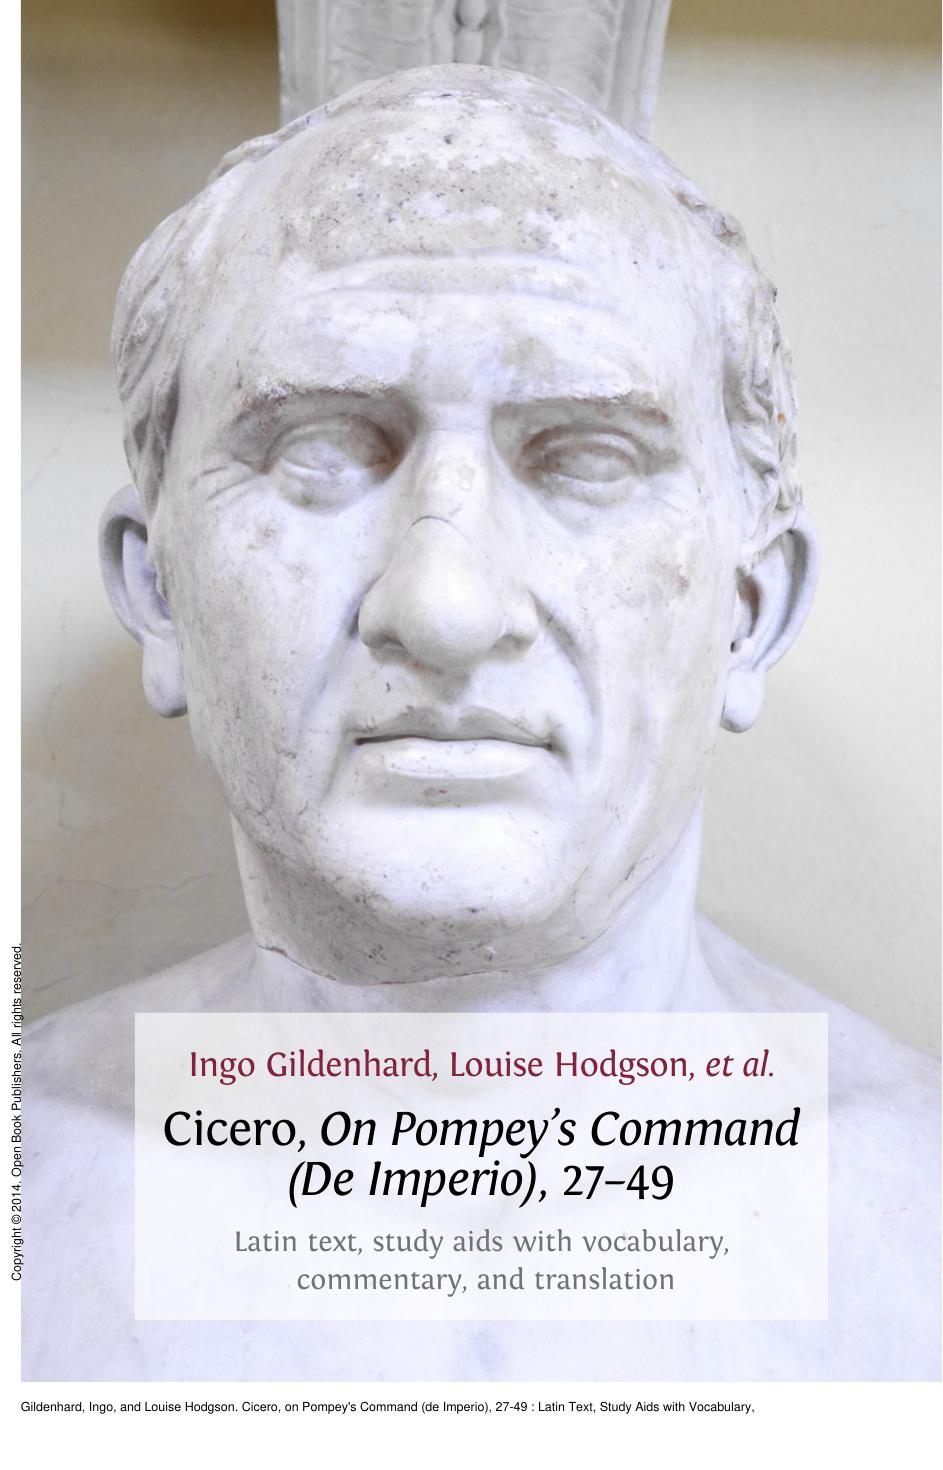 Cicero, on Pompey's Command (de Imperio), 27-49: Latin Text, Study Aids with Vocabulary, Commentary, and Translation by Ingo Gildenhard; Louise Hodgson